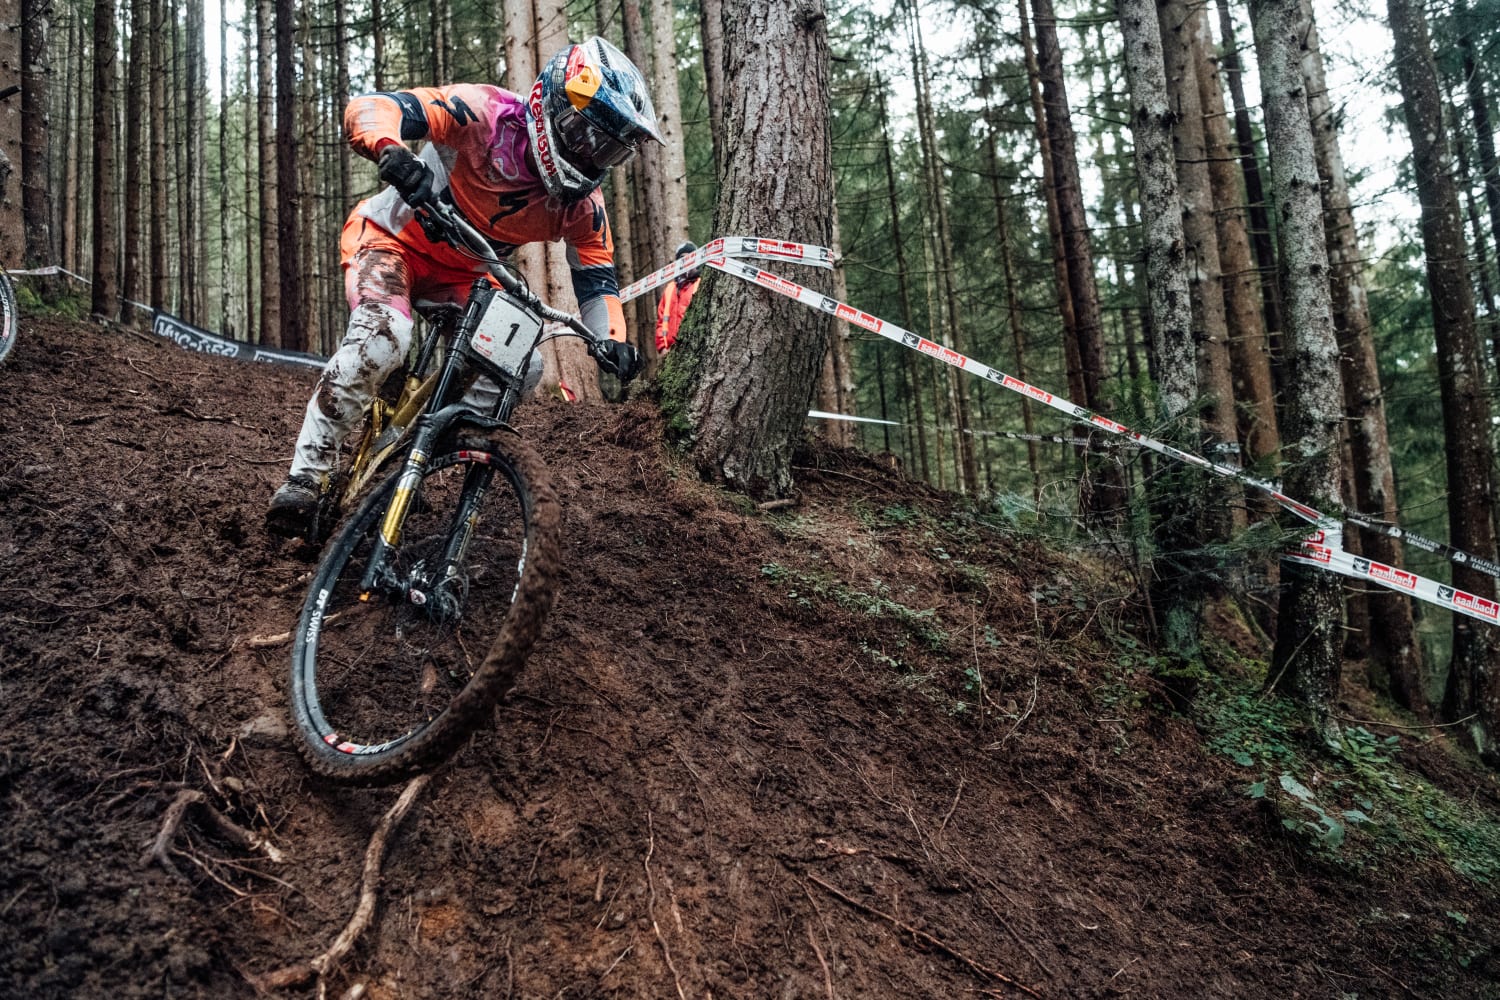 Calendrier Uci World Tour 2022 2021 and 2022 UCI MTB World Cup calendar: DH/XCO dates